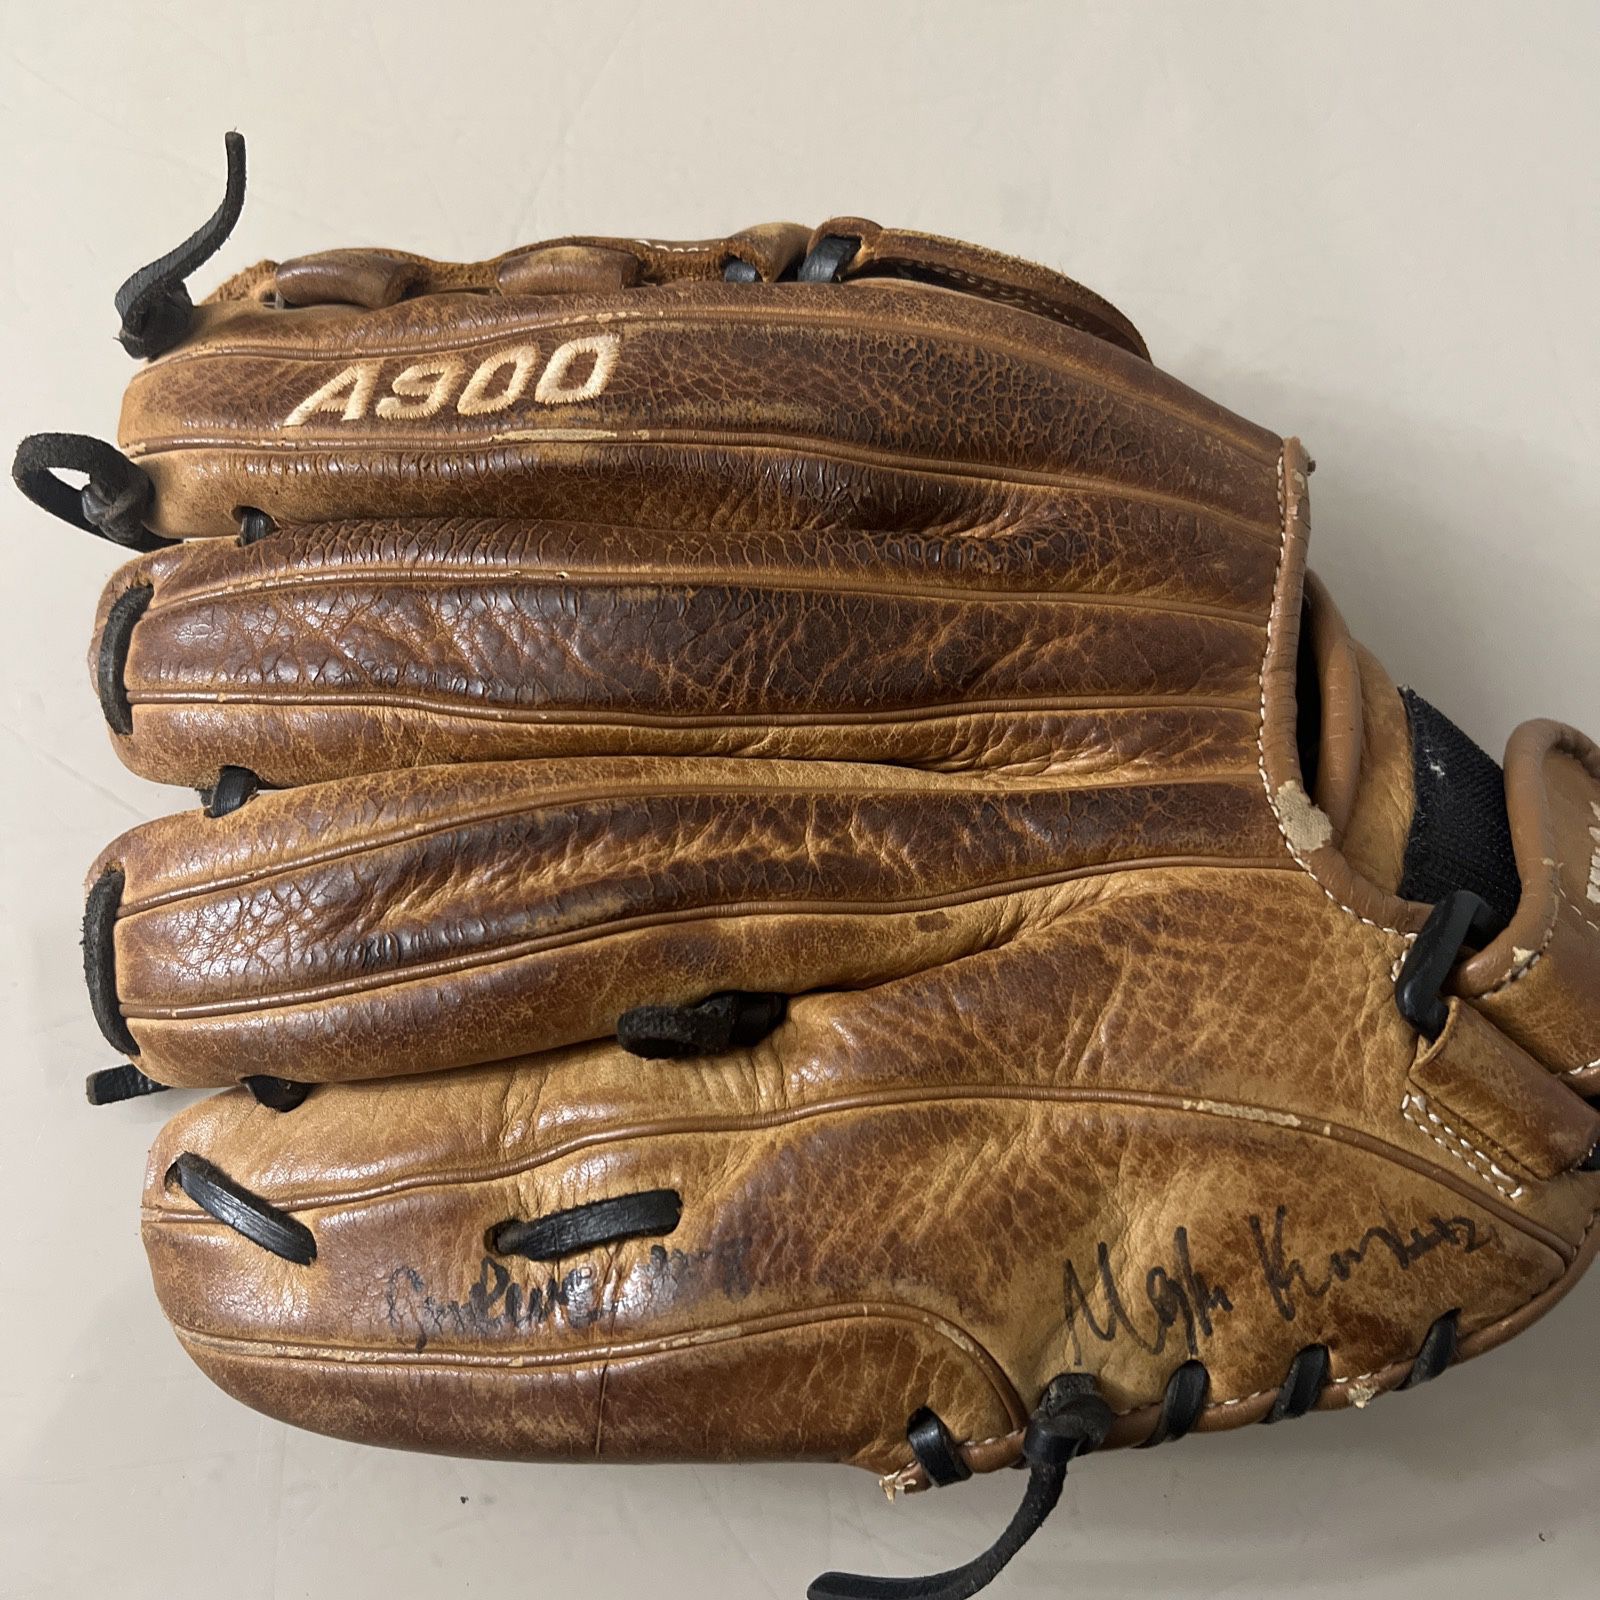 A500 12inc Aura Like Boys Fully Broken In Baseball Glove Right Hand Throw. Pre owned in great condition with normal signs of usage. There are unknown 